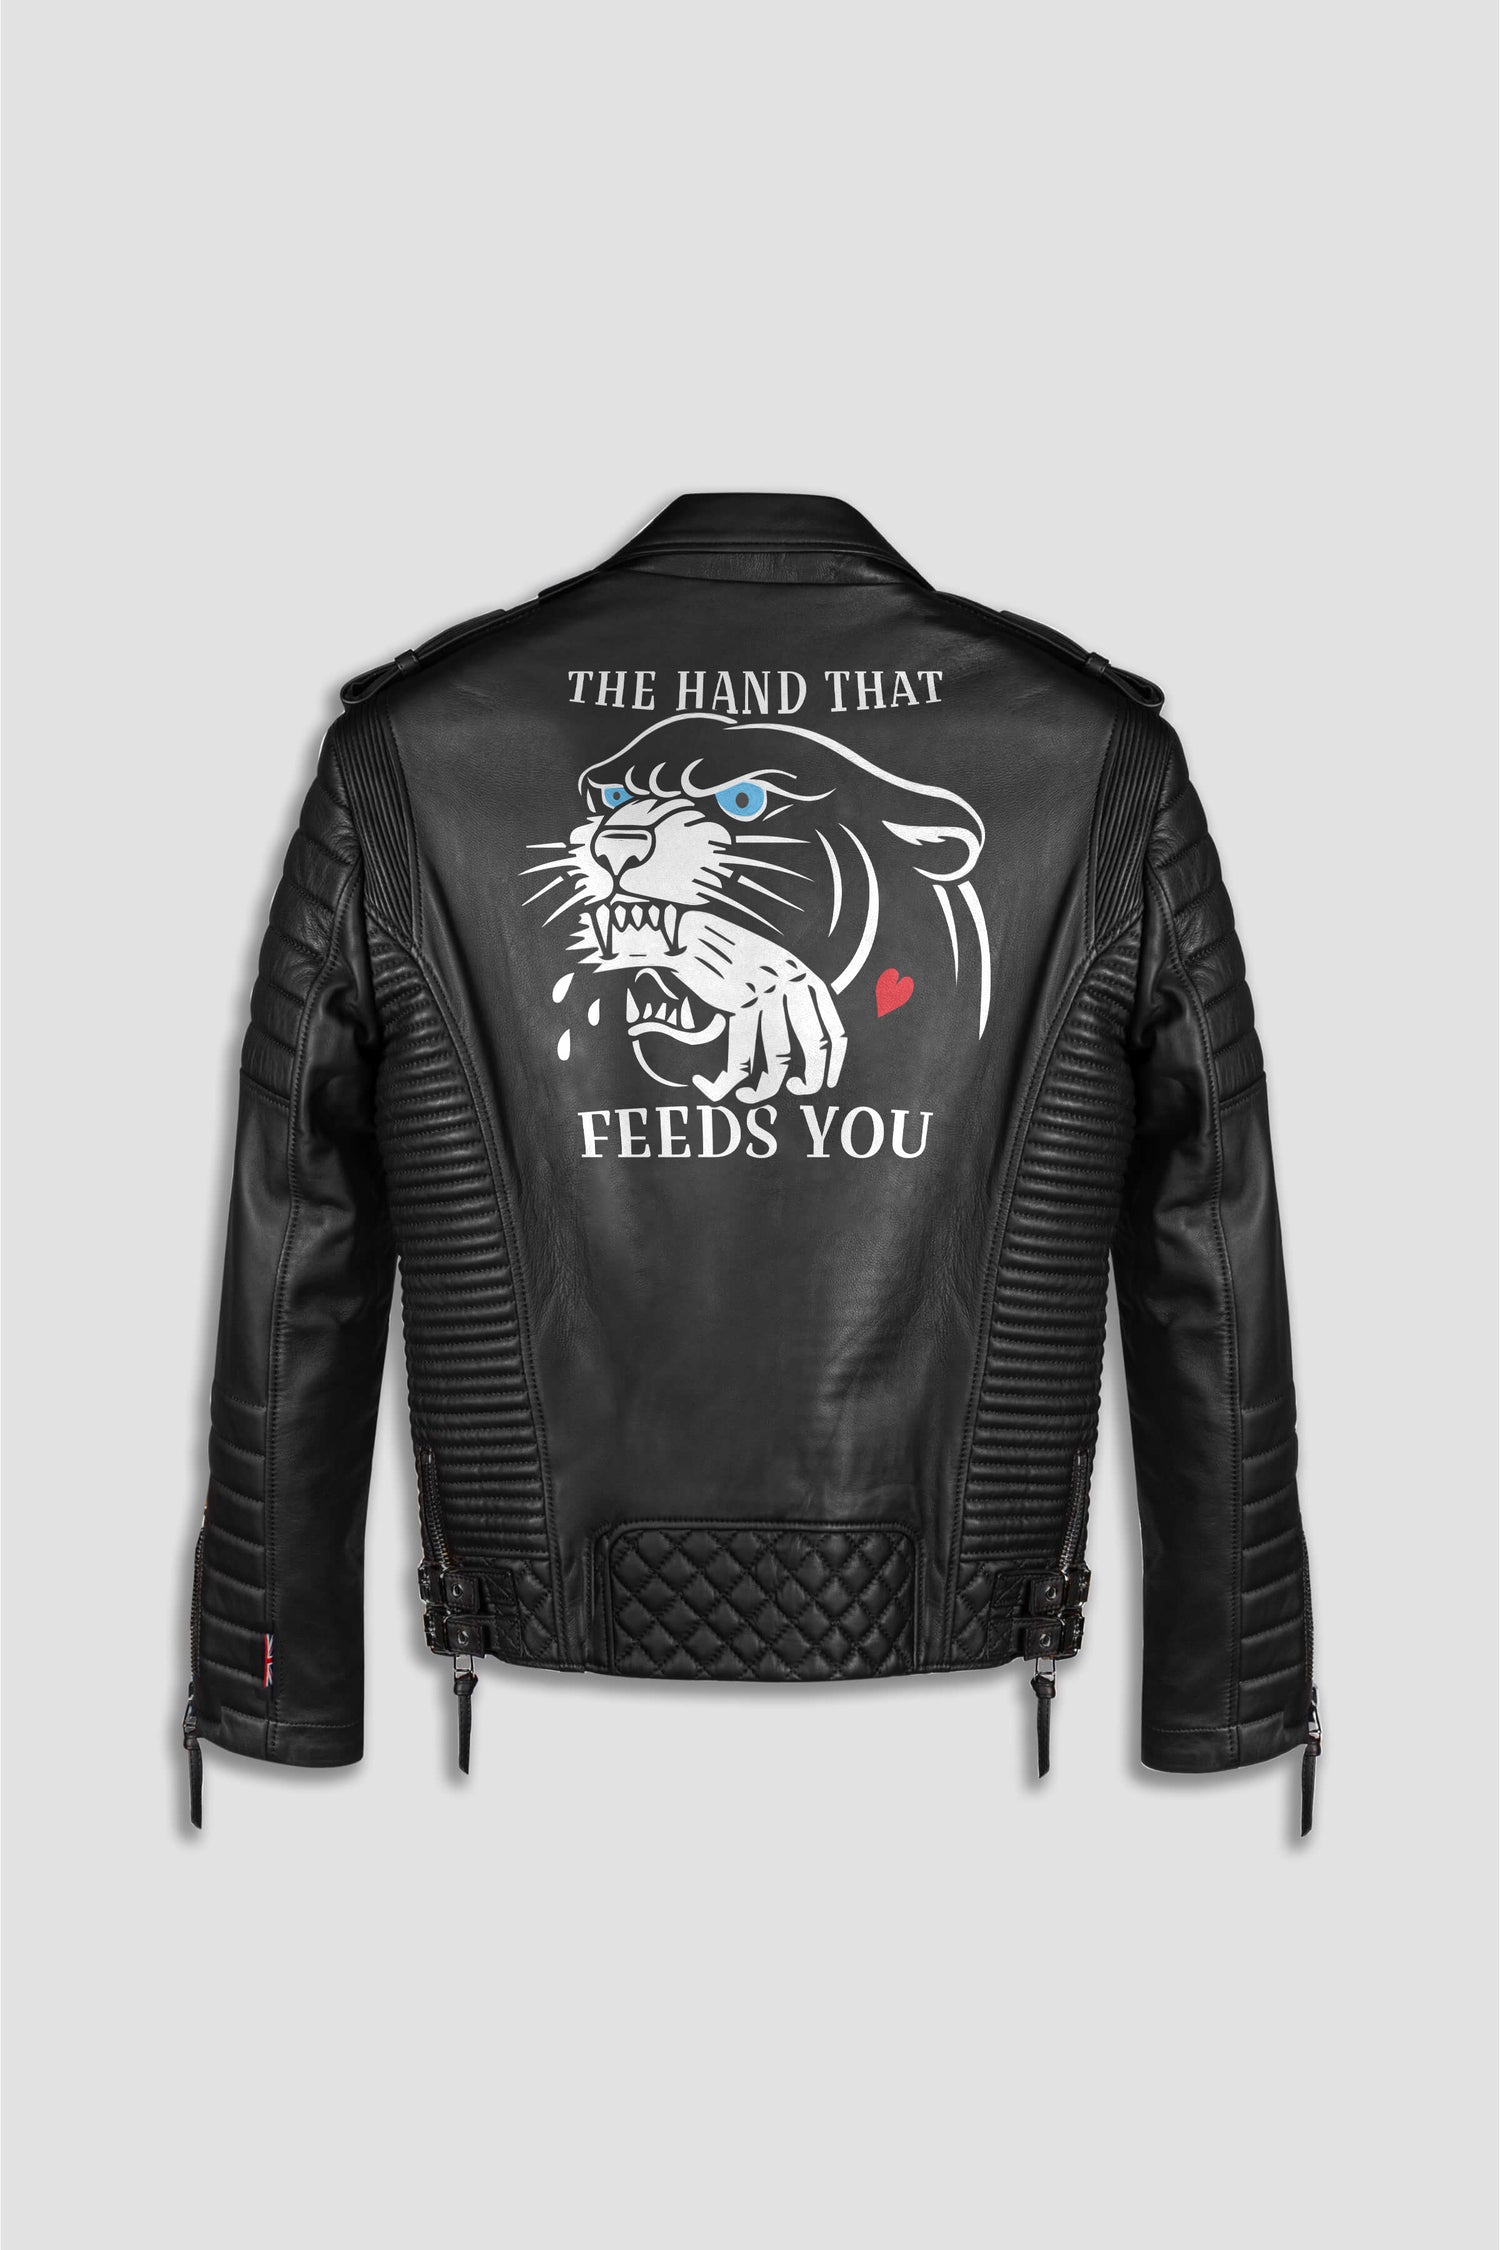 Men's Leather Biker Jackets - By Price: Highest to Lowest